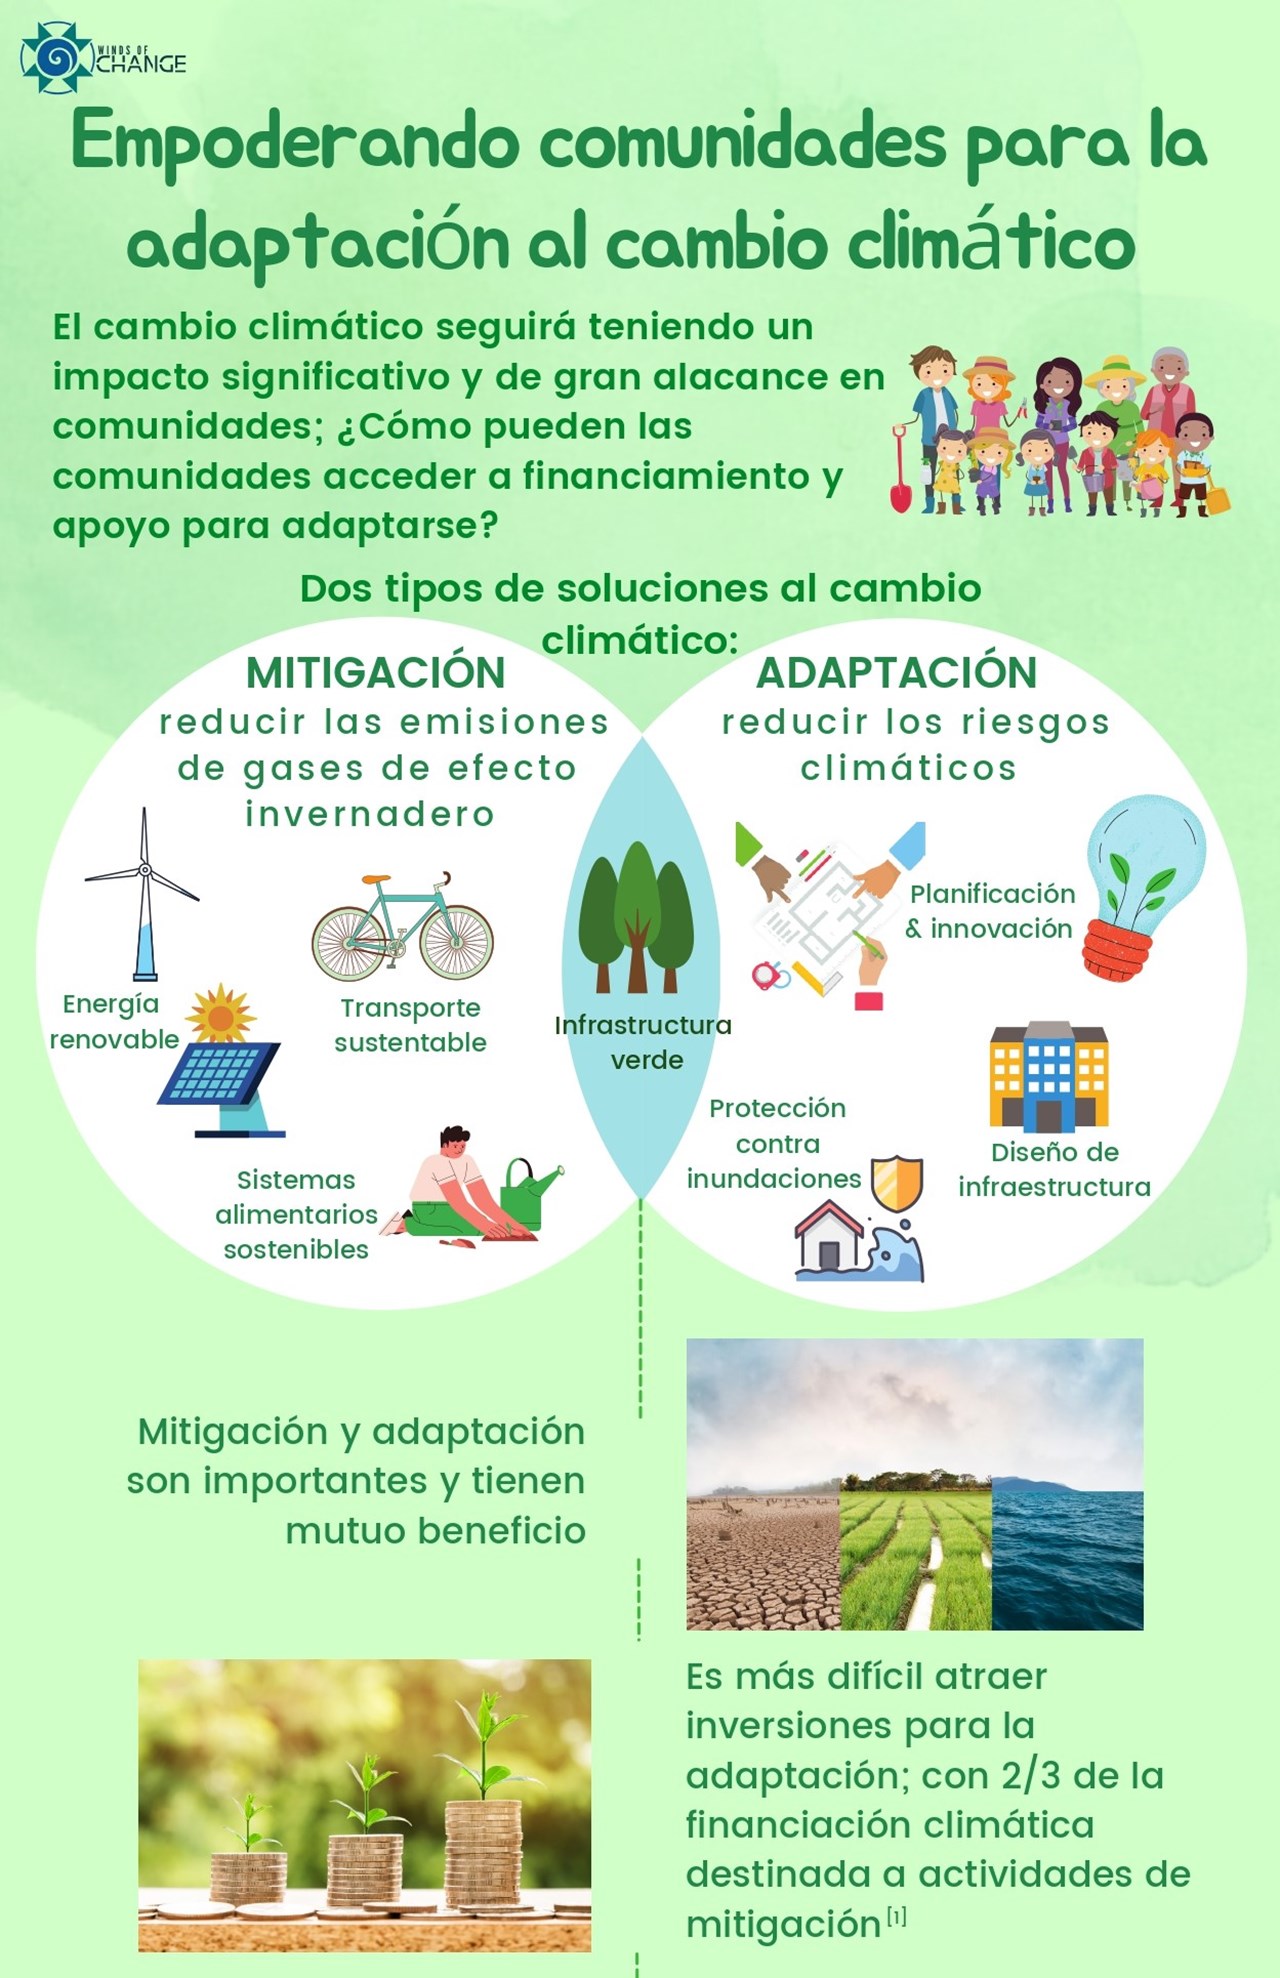 Image Expanding private sector finance in climate change community-based projects for Chile and New Zealand infographic_page-0003 (2).jpg